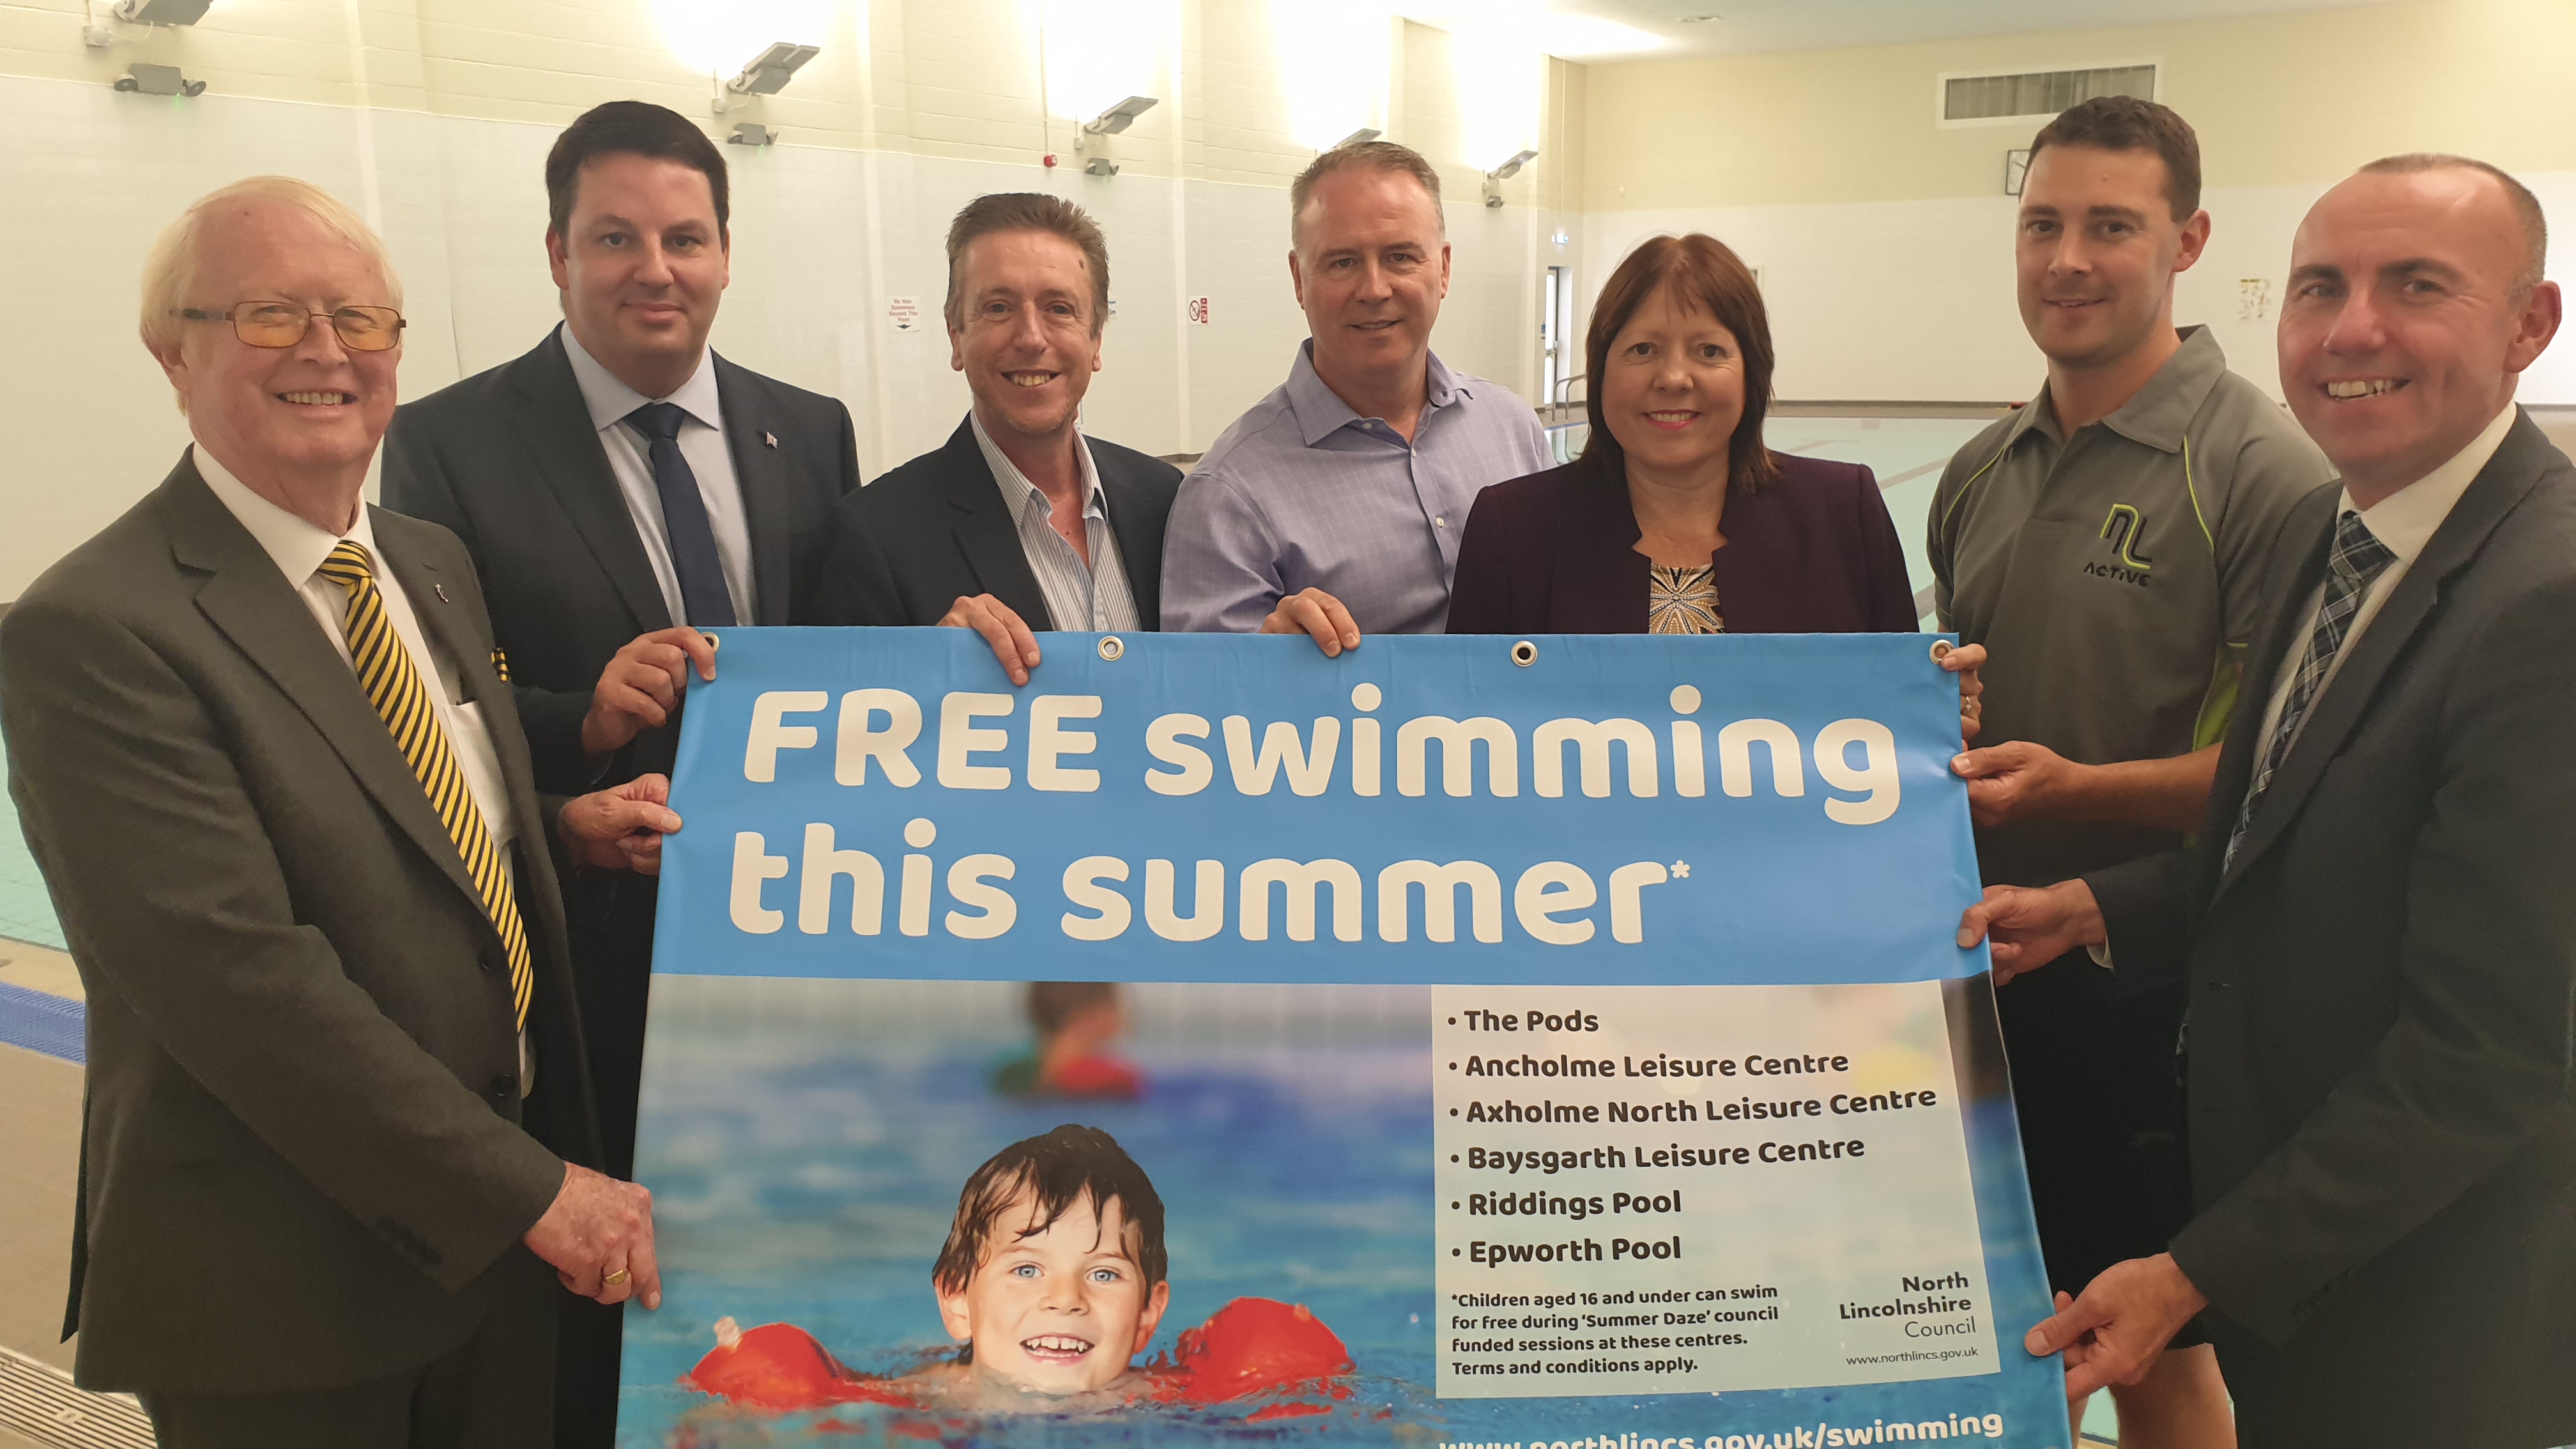 Free Swimming Sessions and £1 Bus Journeys for Kids in North Lincs